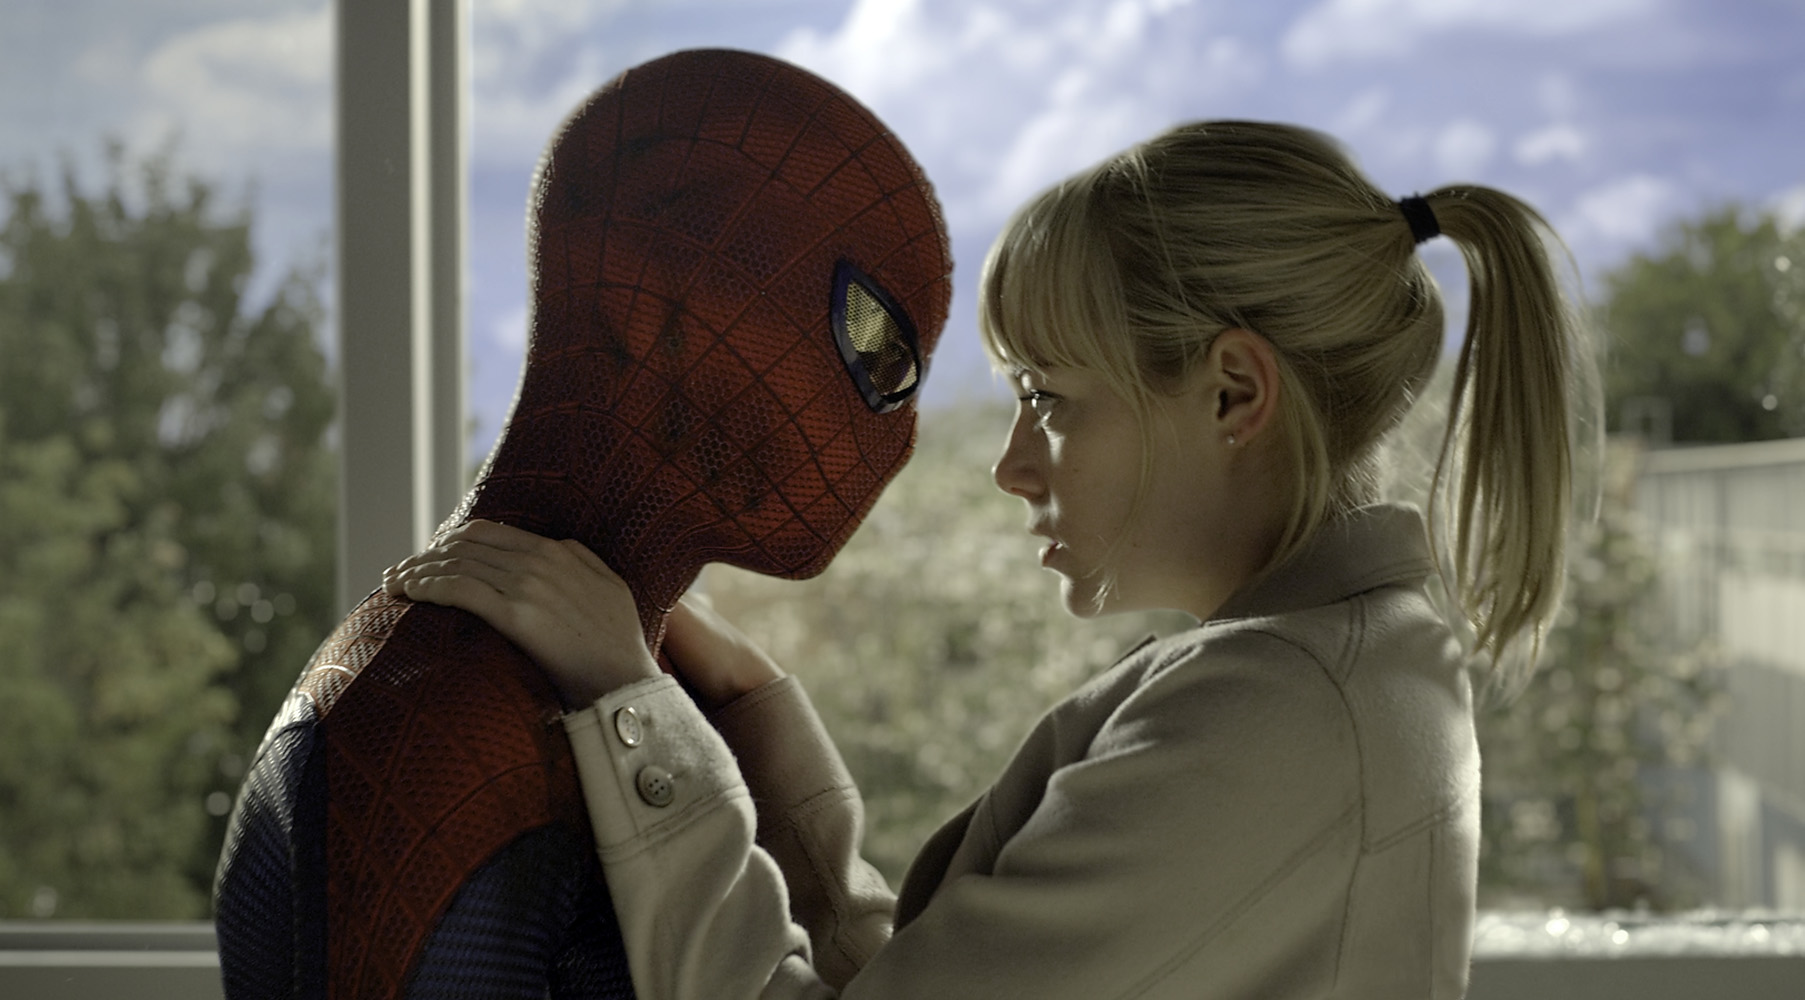 WHAT, NO UPSIDE-DOWN KISS? Spidey and Stacy get cozy. Movie stills from Columbia Pictures